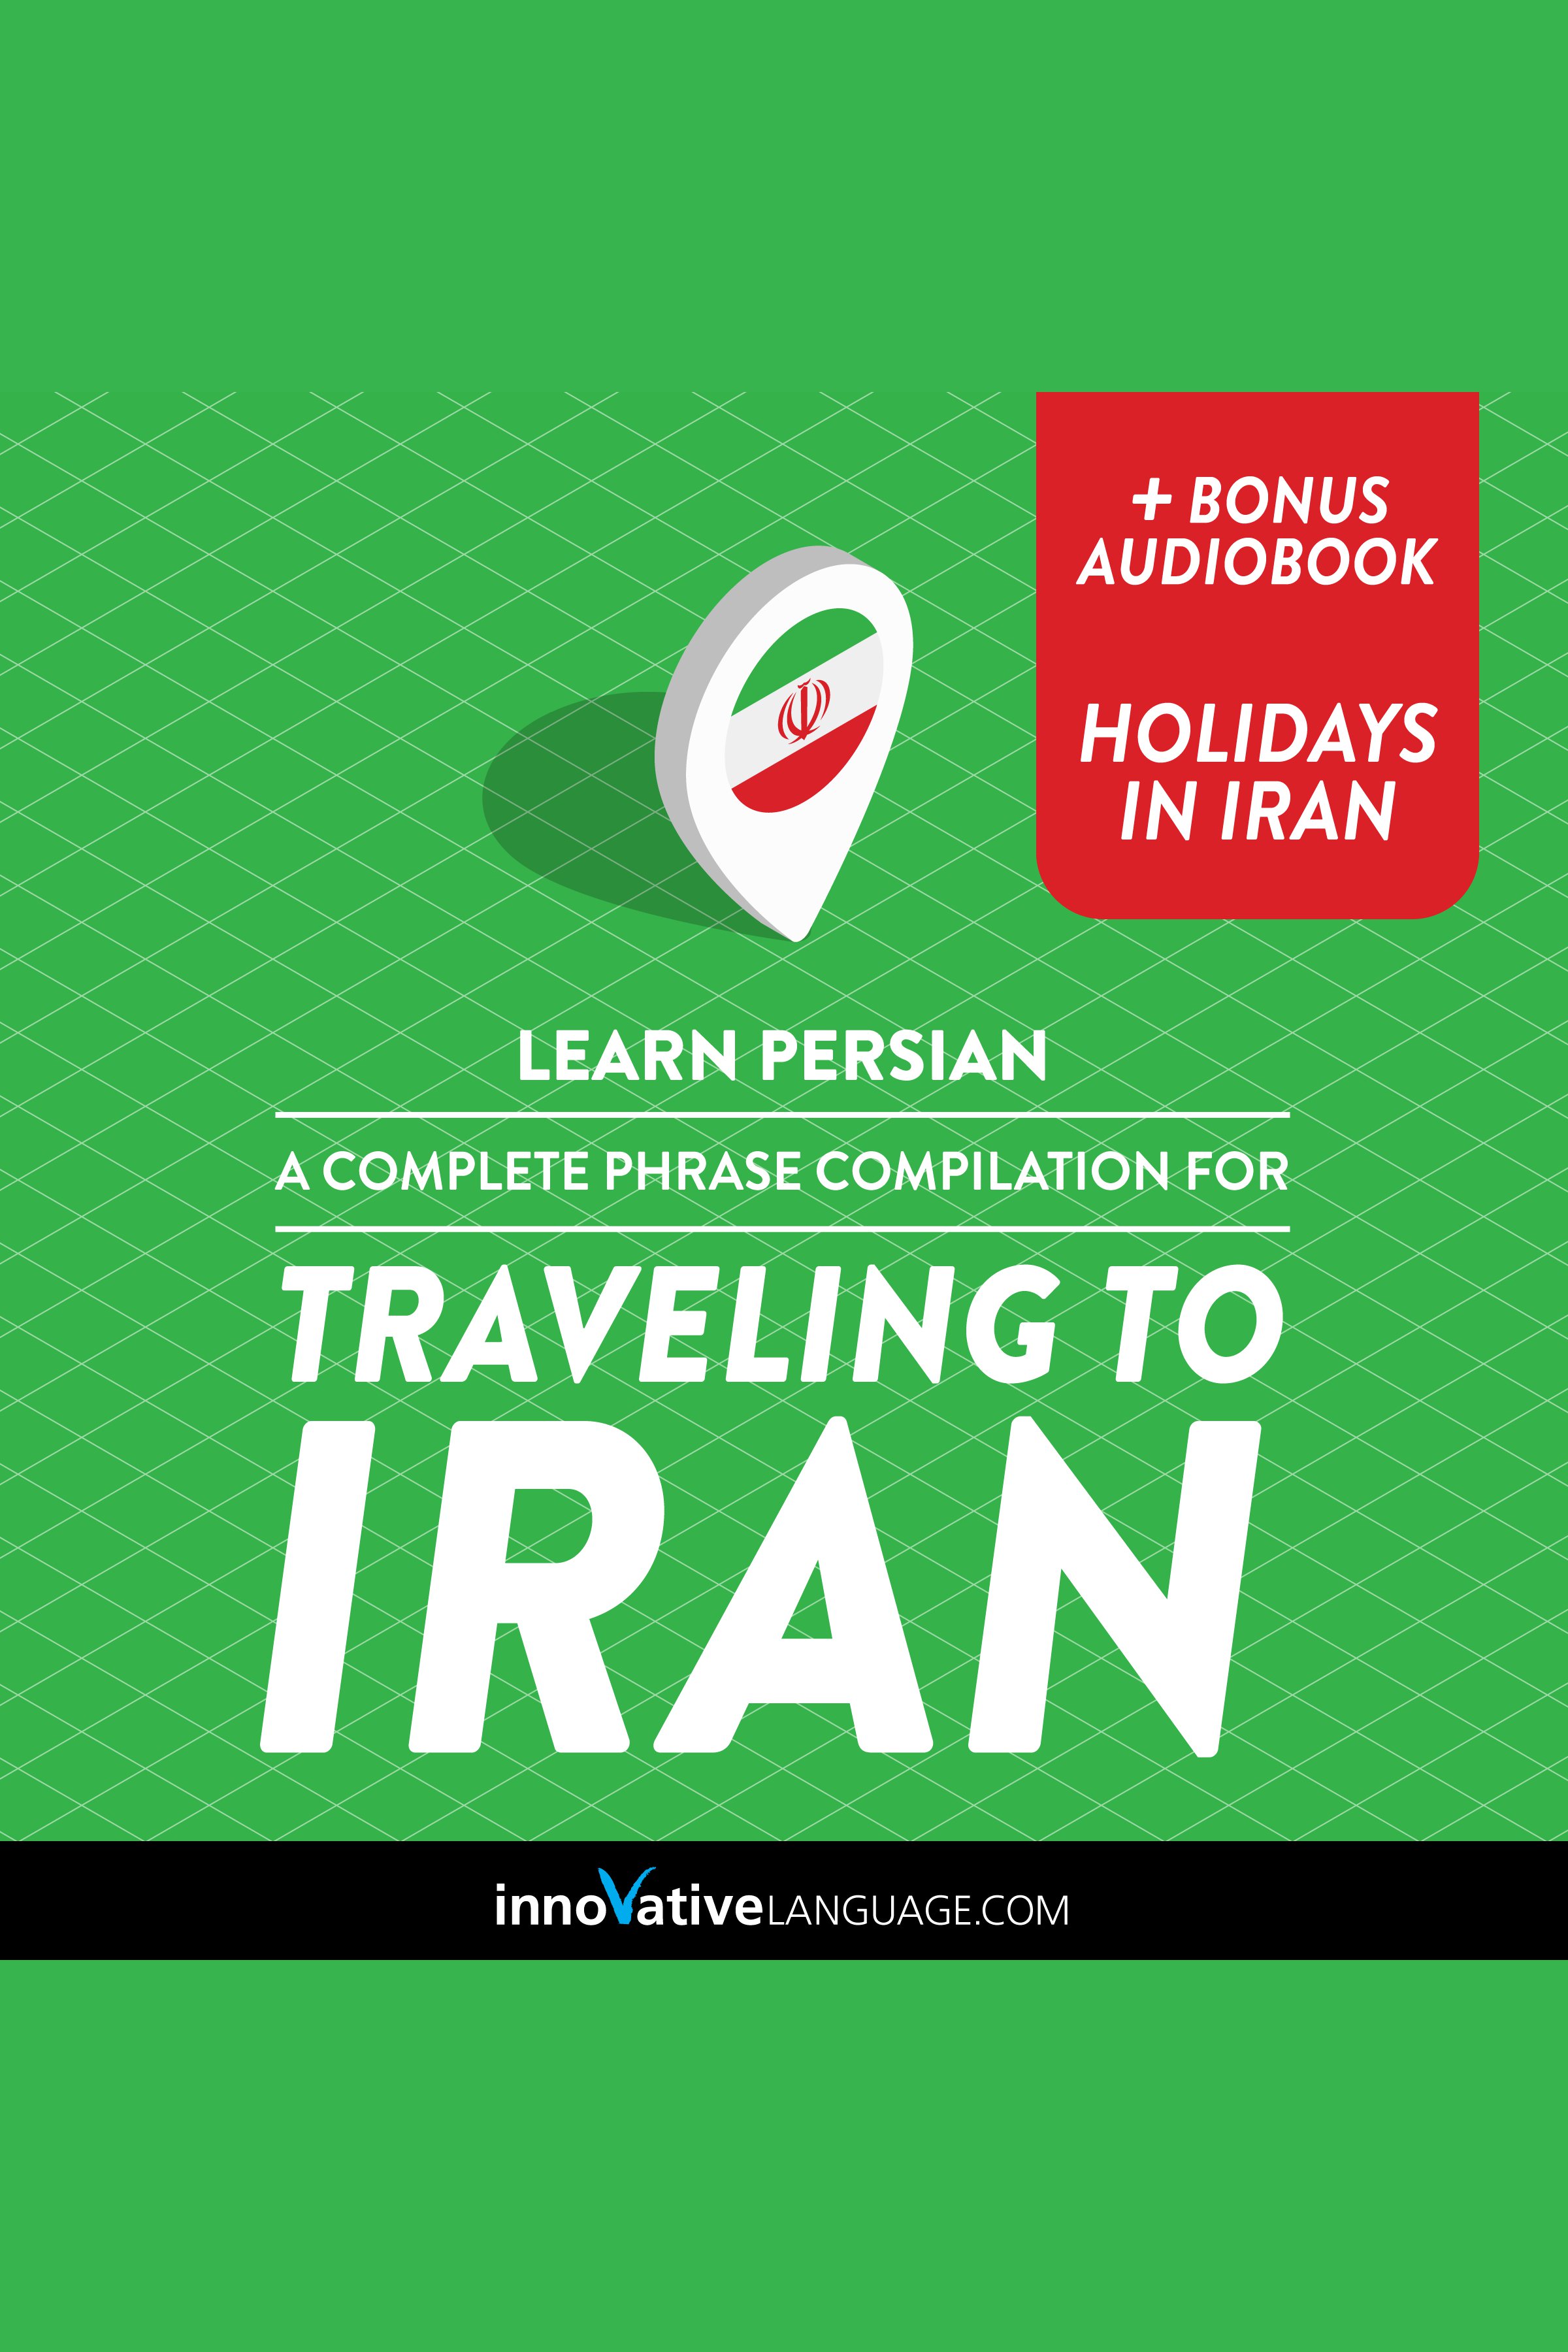 Learn Persian: A Complete Phrase Compilation for Traveling to Iran cover image